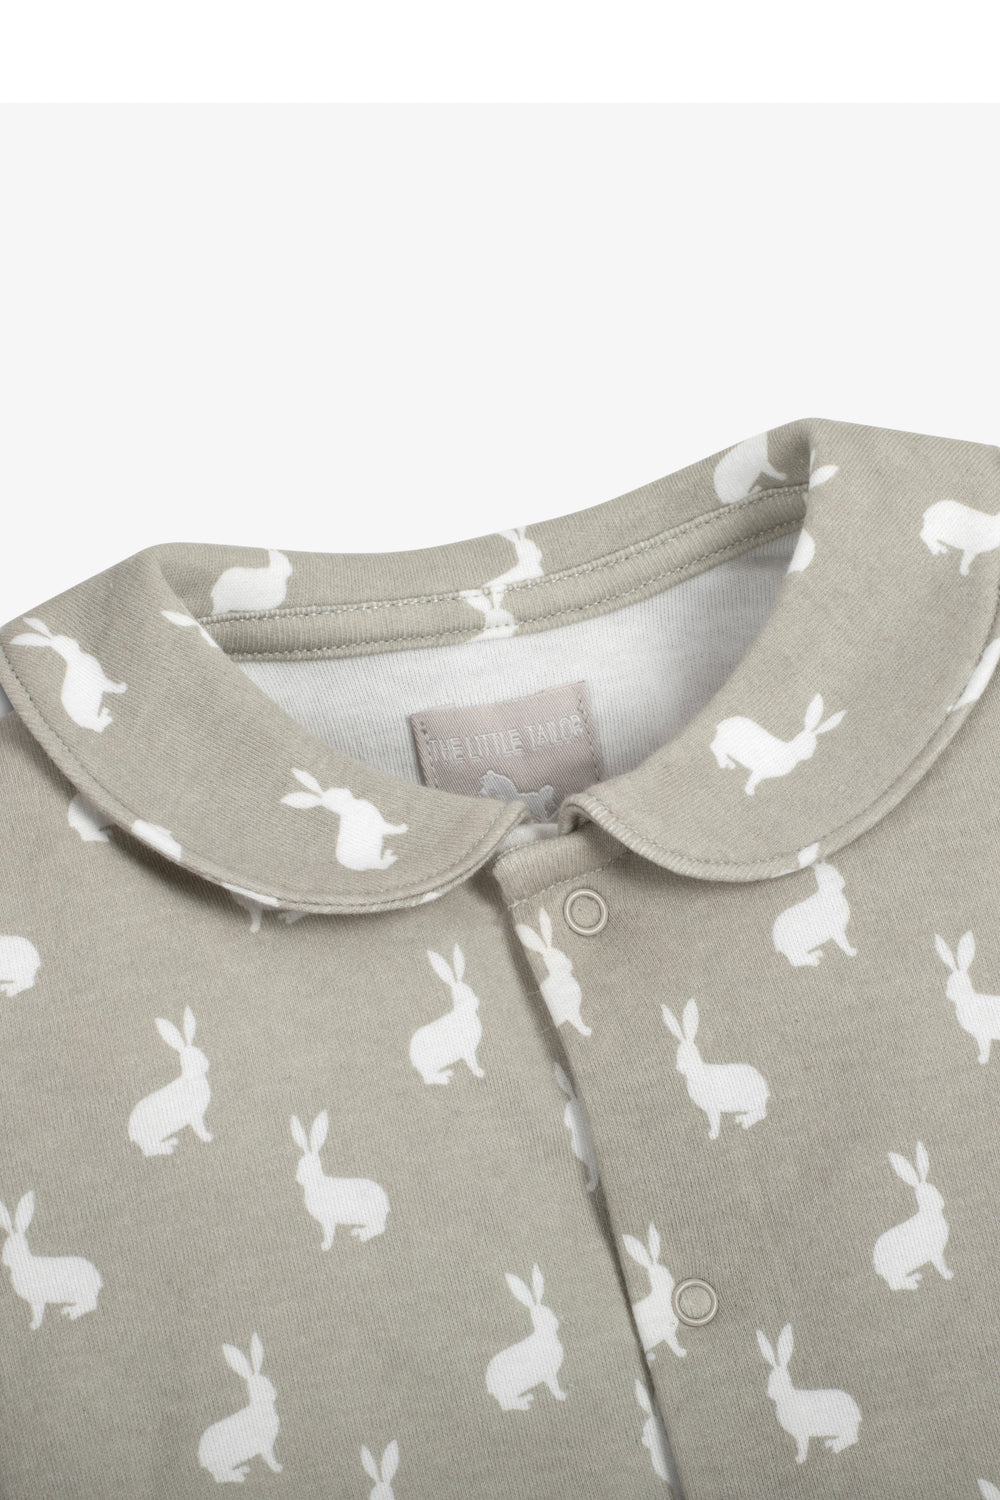 Jersey Shorty Romper - fawn hare print